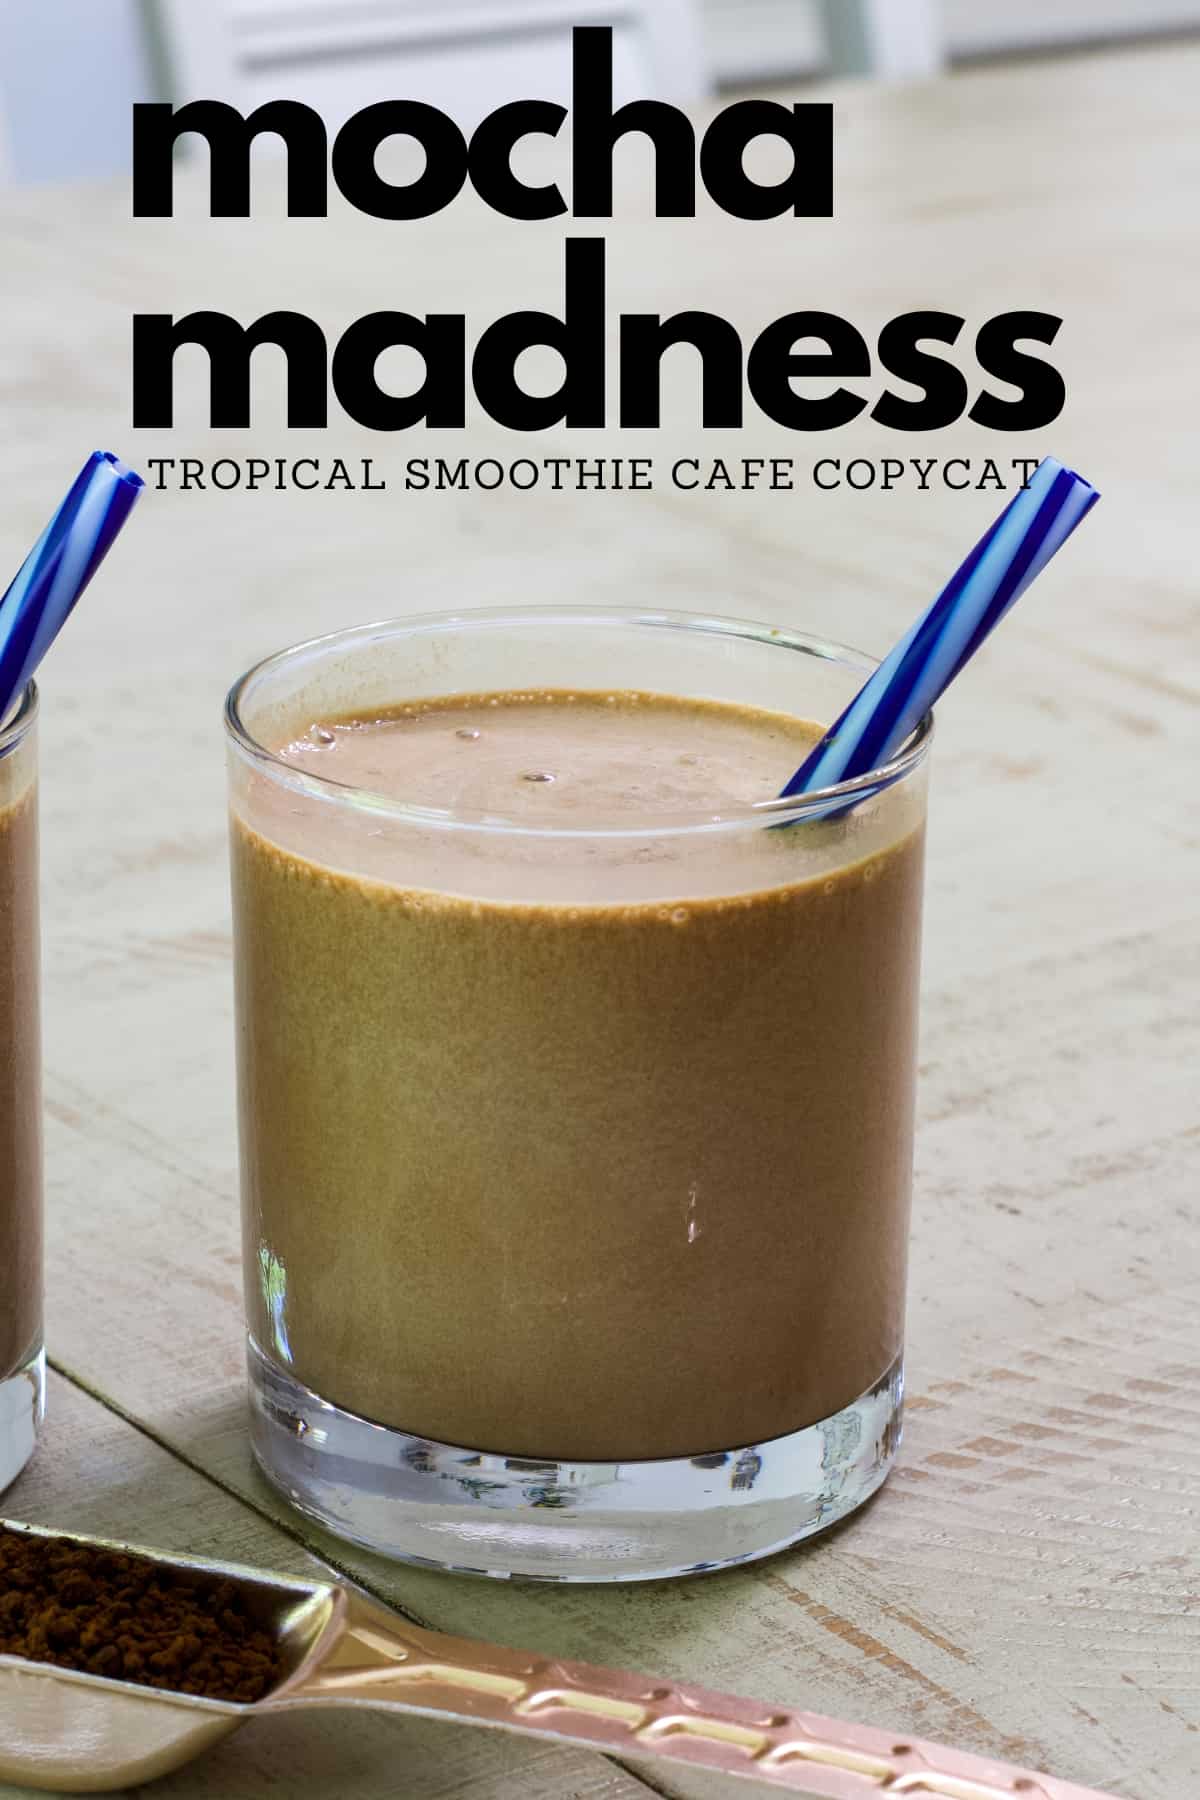 Easy Tropical Cafe Mocha Madness Smoothie Recipe only requires 4 ingredients and is a delicious and easy copycat of the restaurant's version. via @mindyscookingobsession